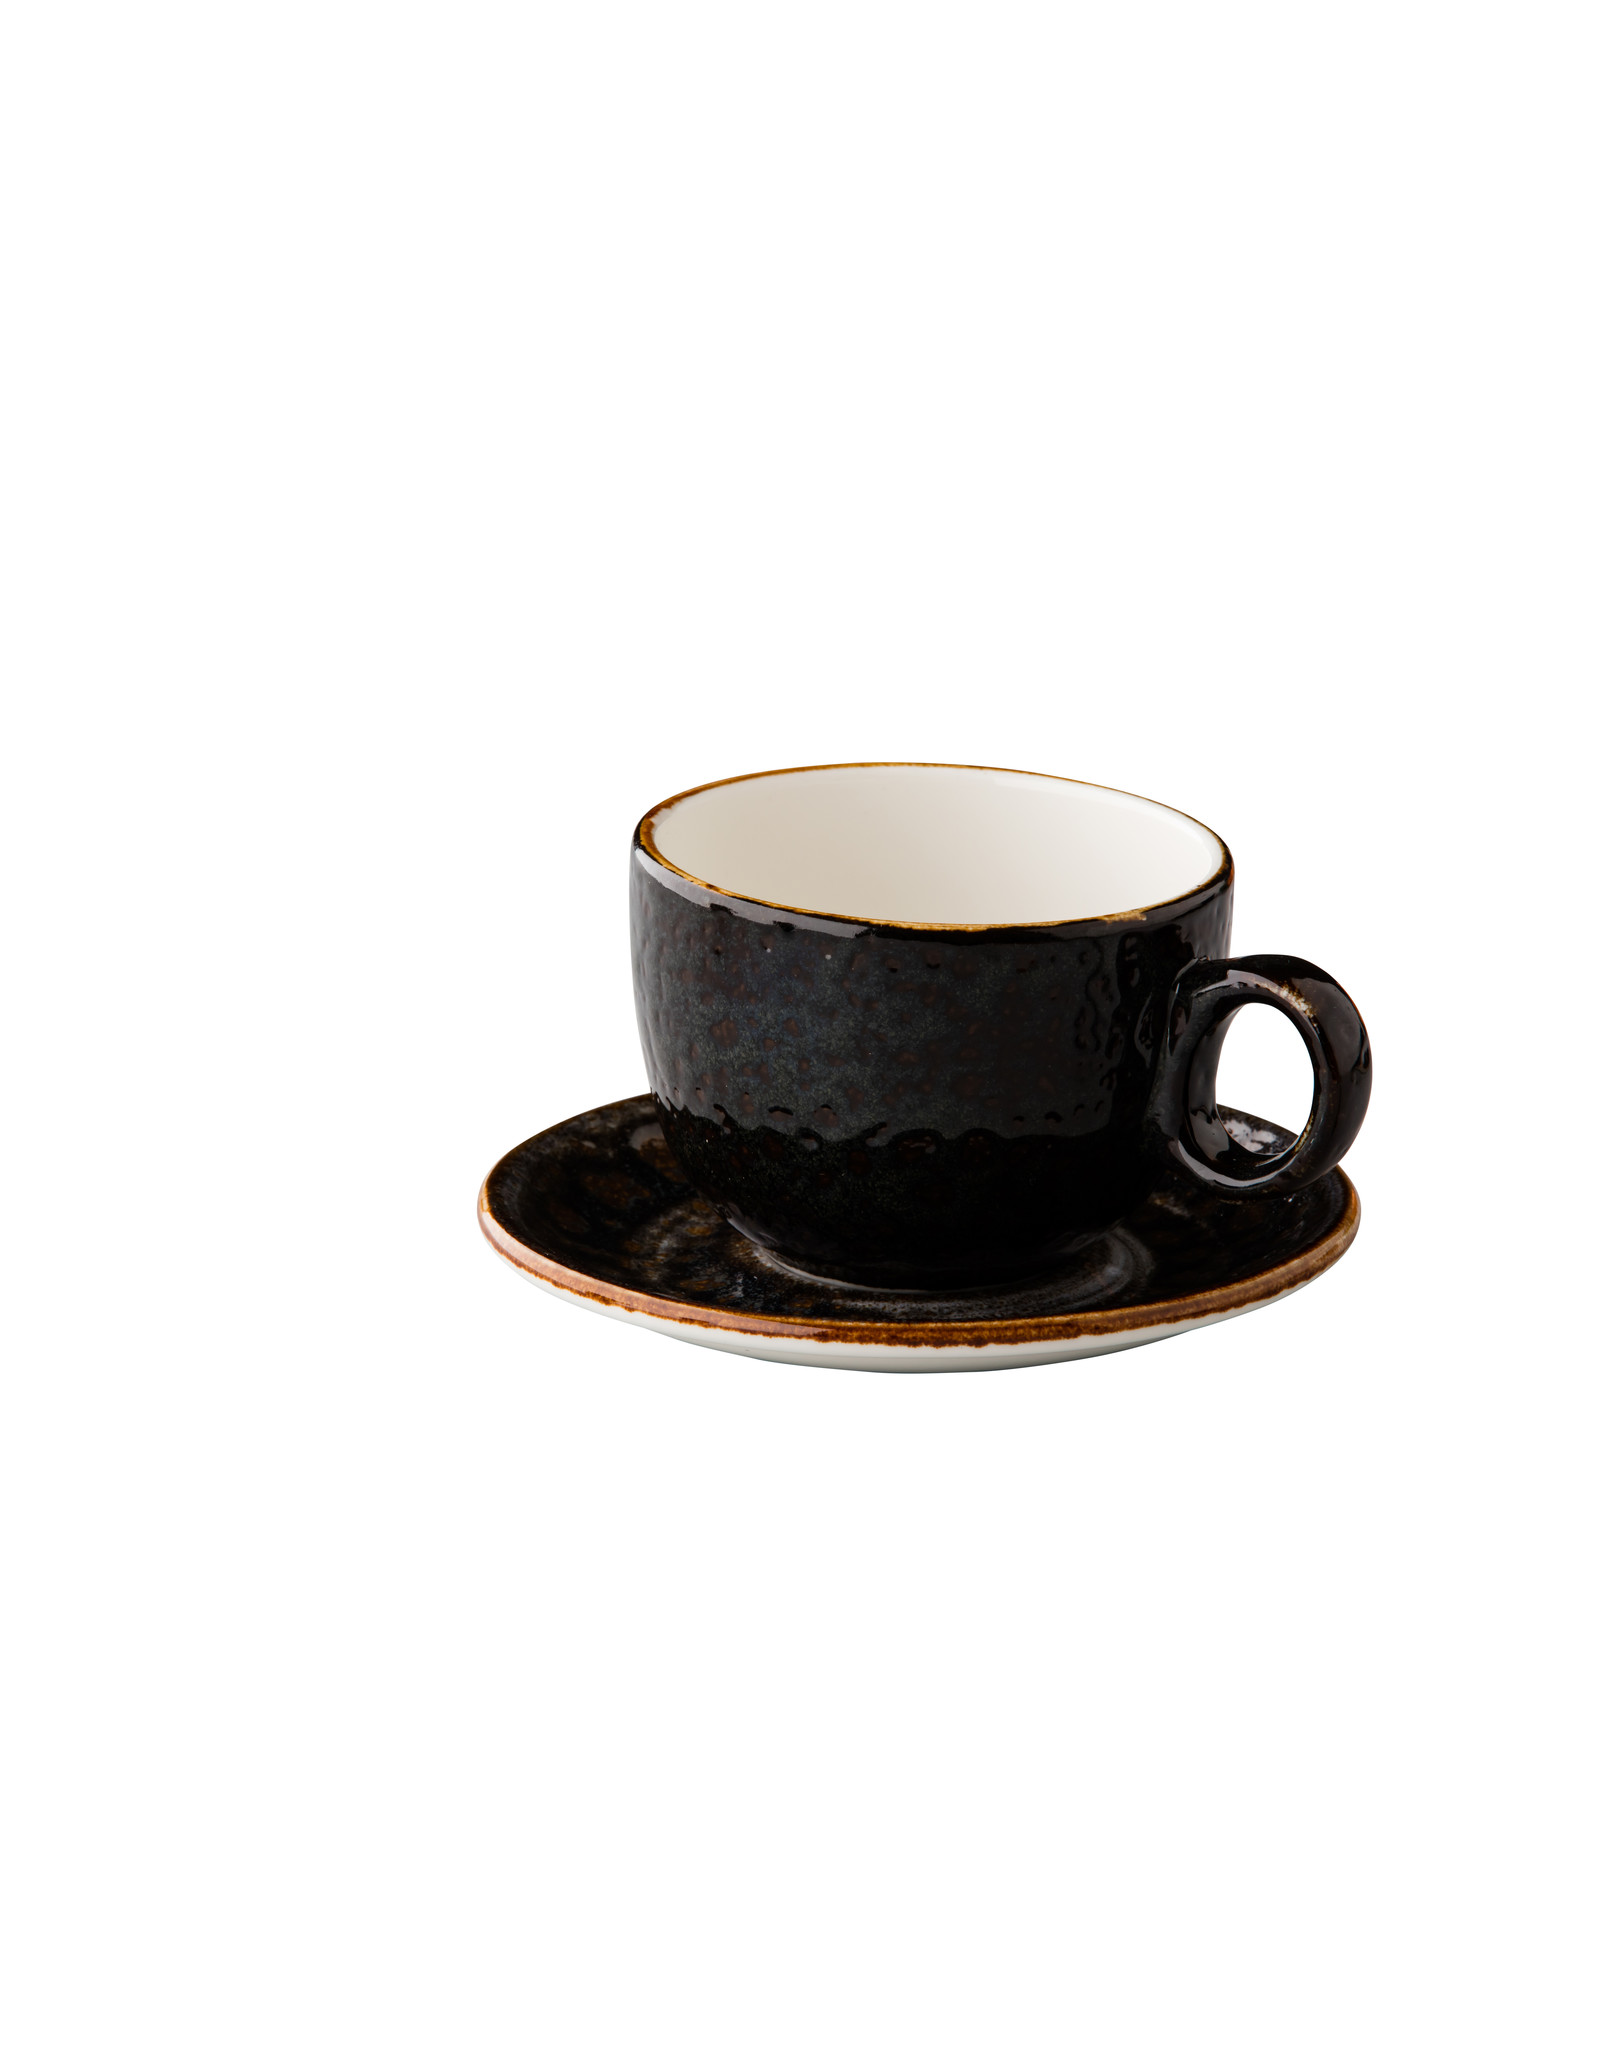 Stylepoint Jersey multifunctional cup saucer brown 15 cm